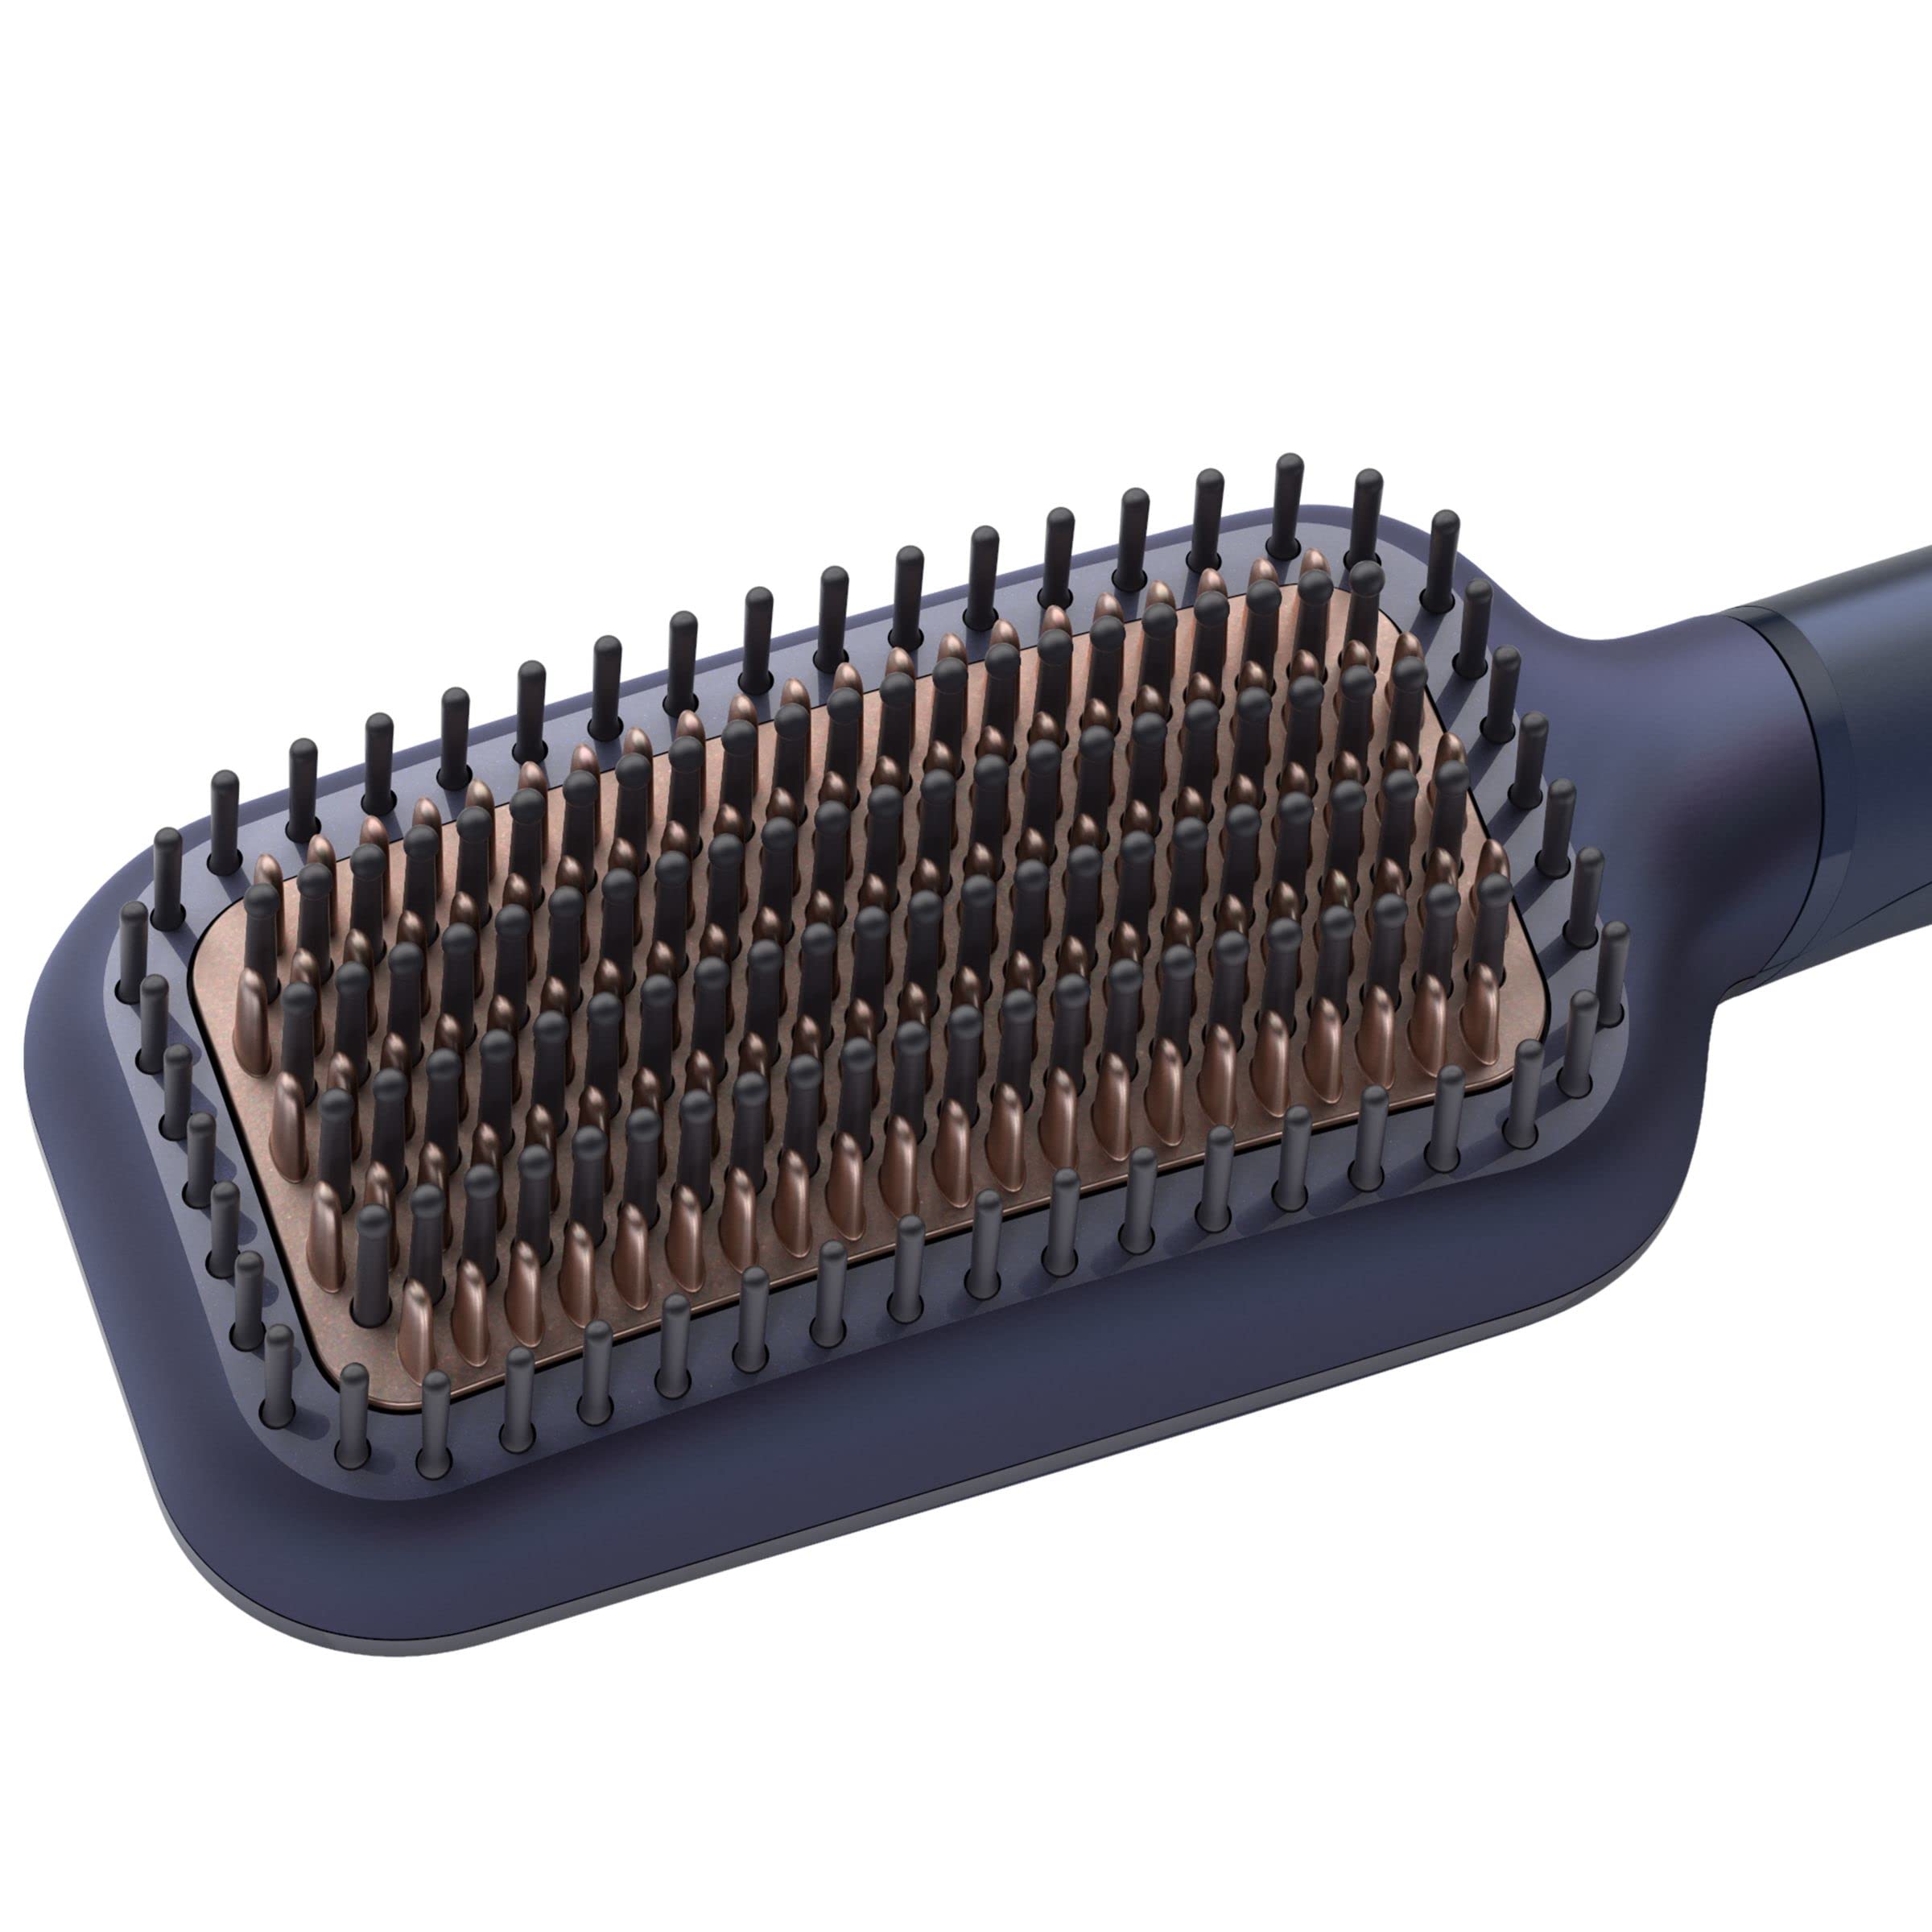 PHILIPS Women's ThermoProtect Large Brush, Multicolored